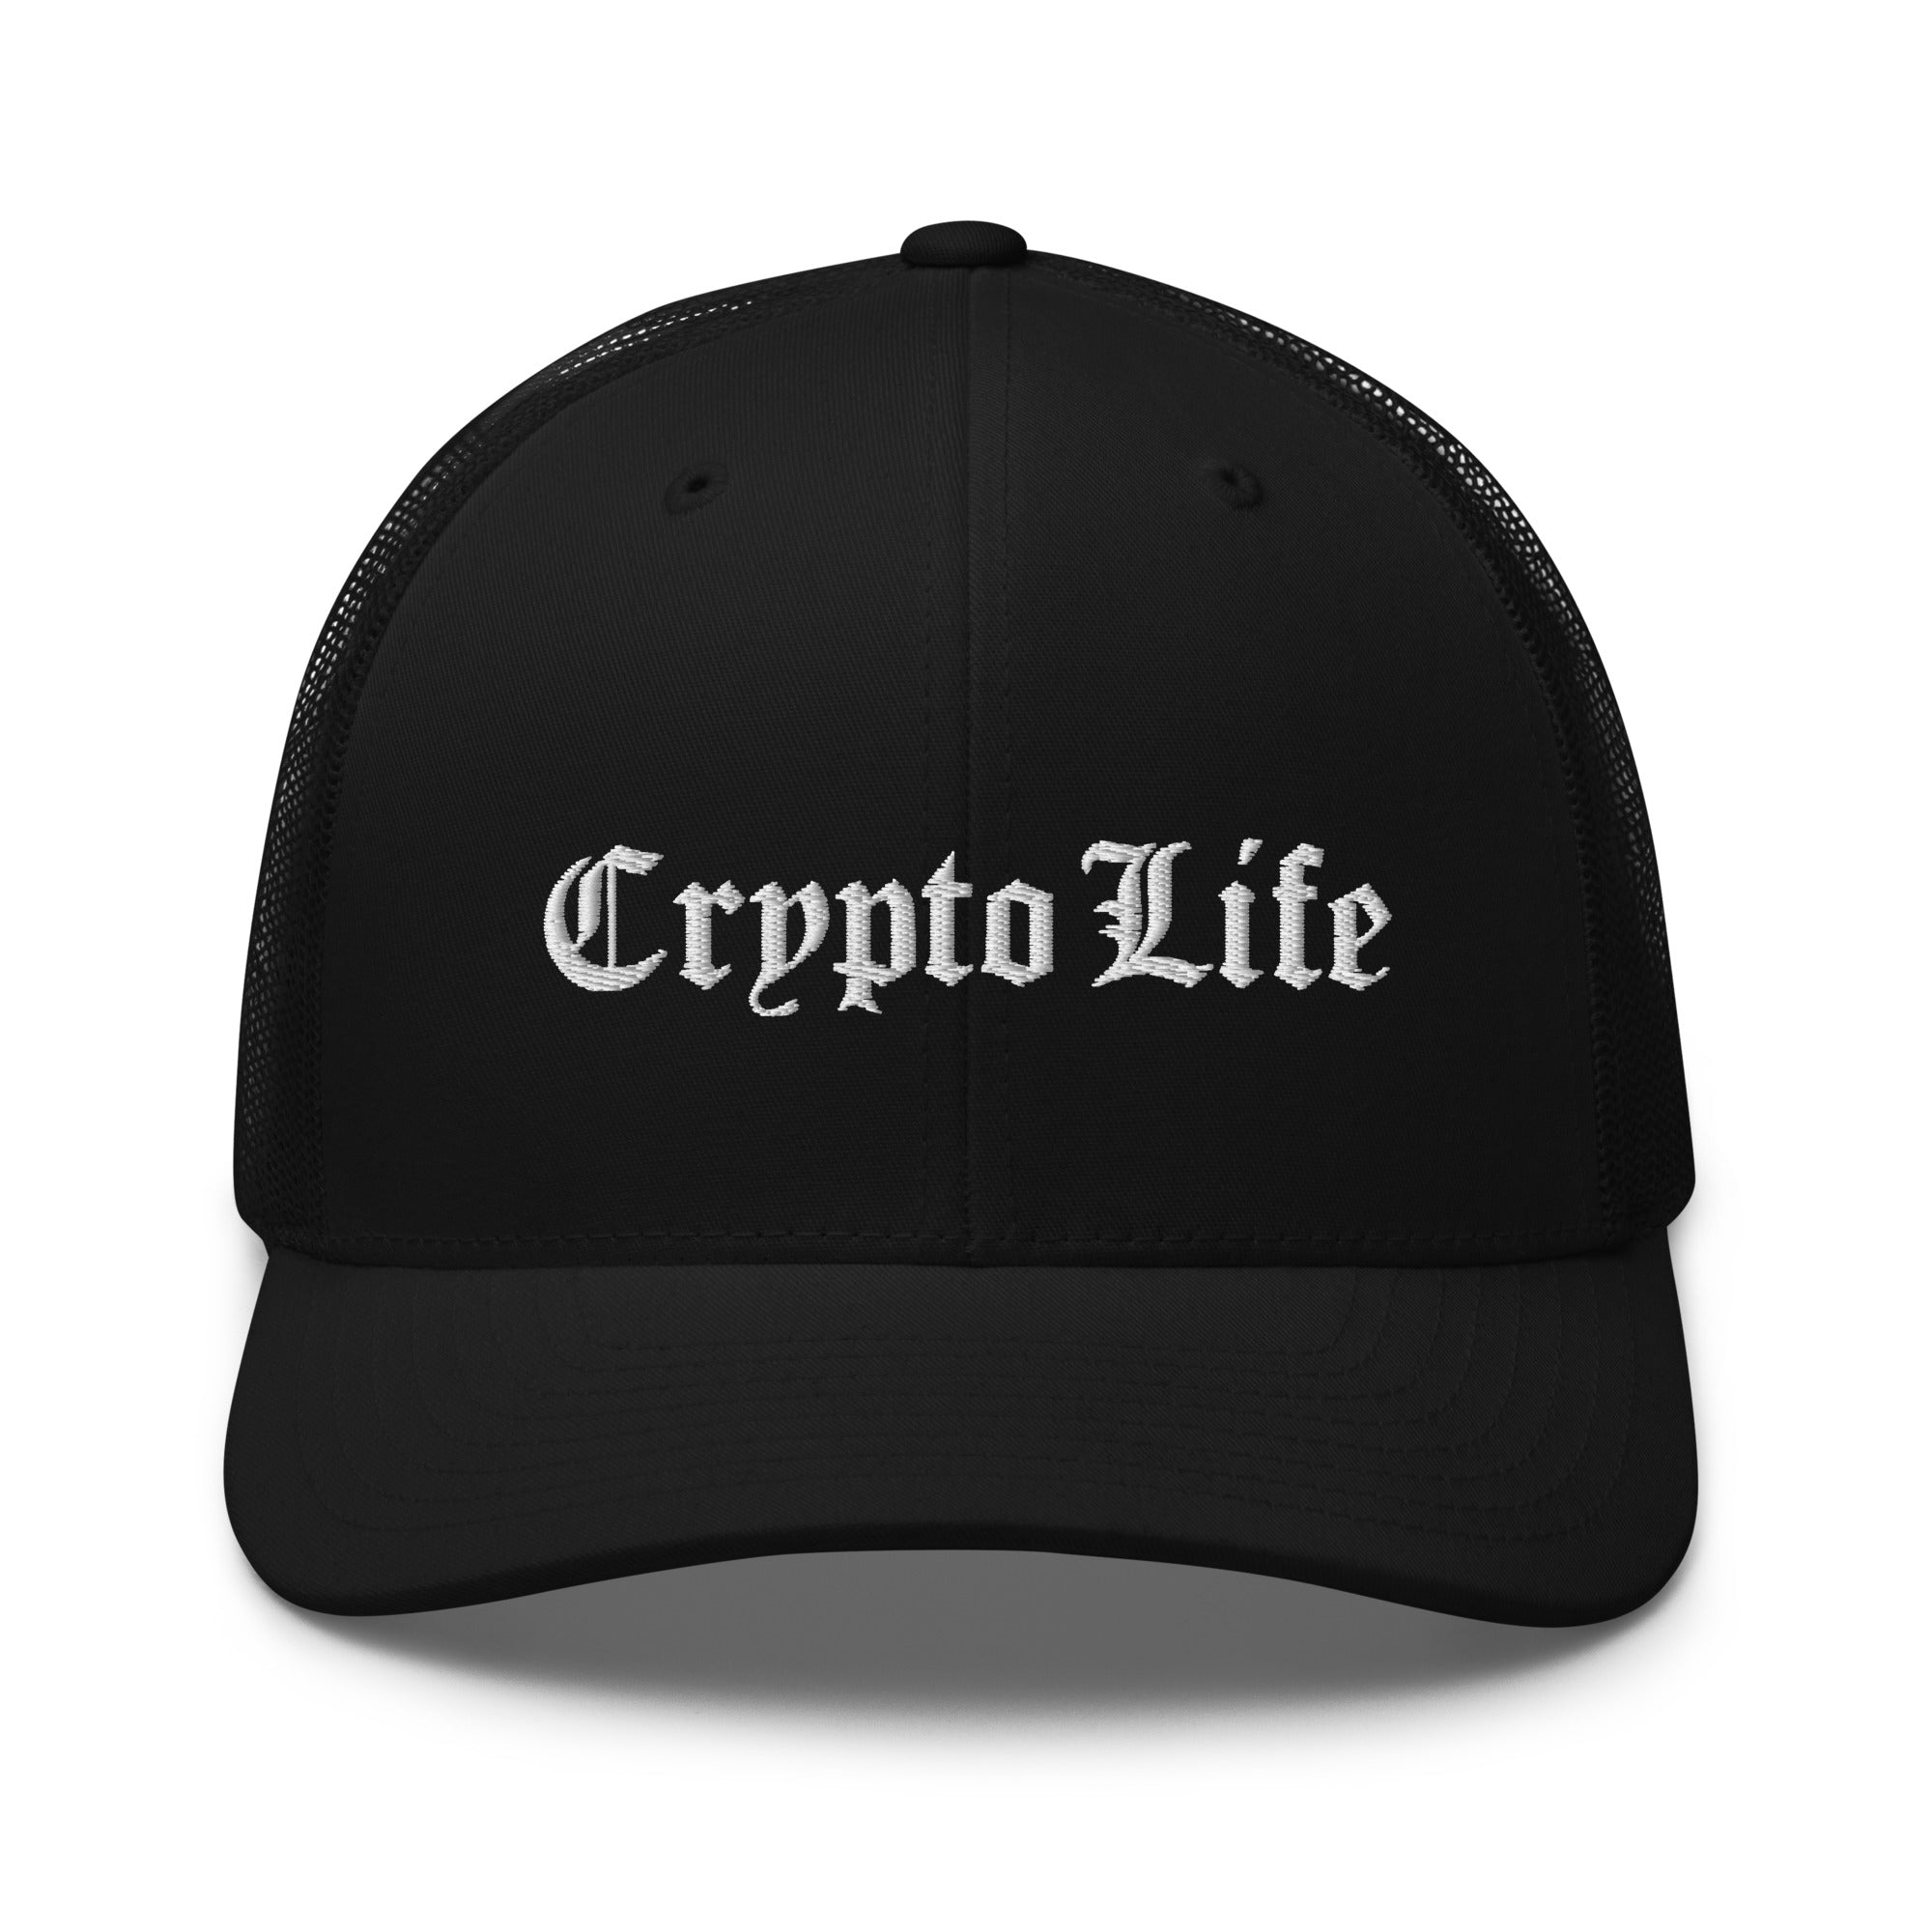 Crypto Headwear - The Crypto Life Trucker Hat features an embroidered Gothic script design. Color: Black. Front view.